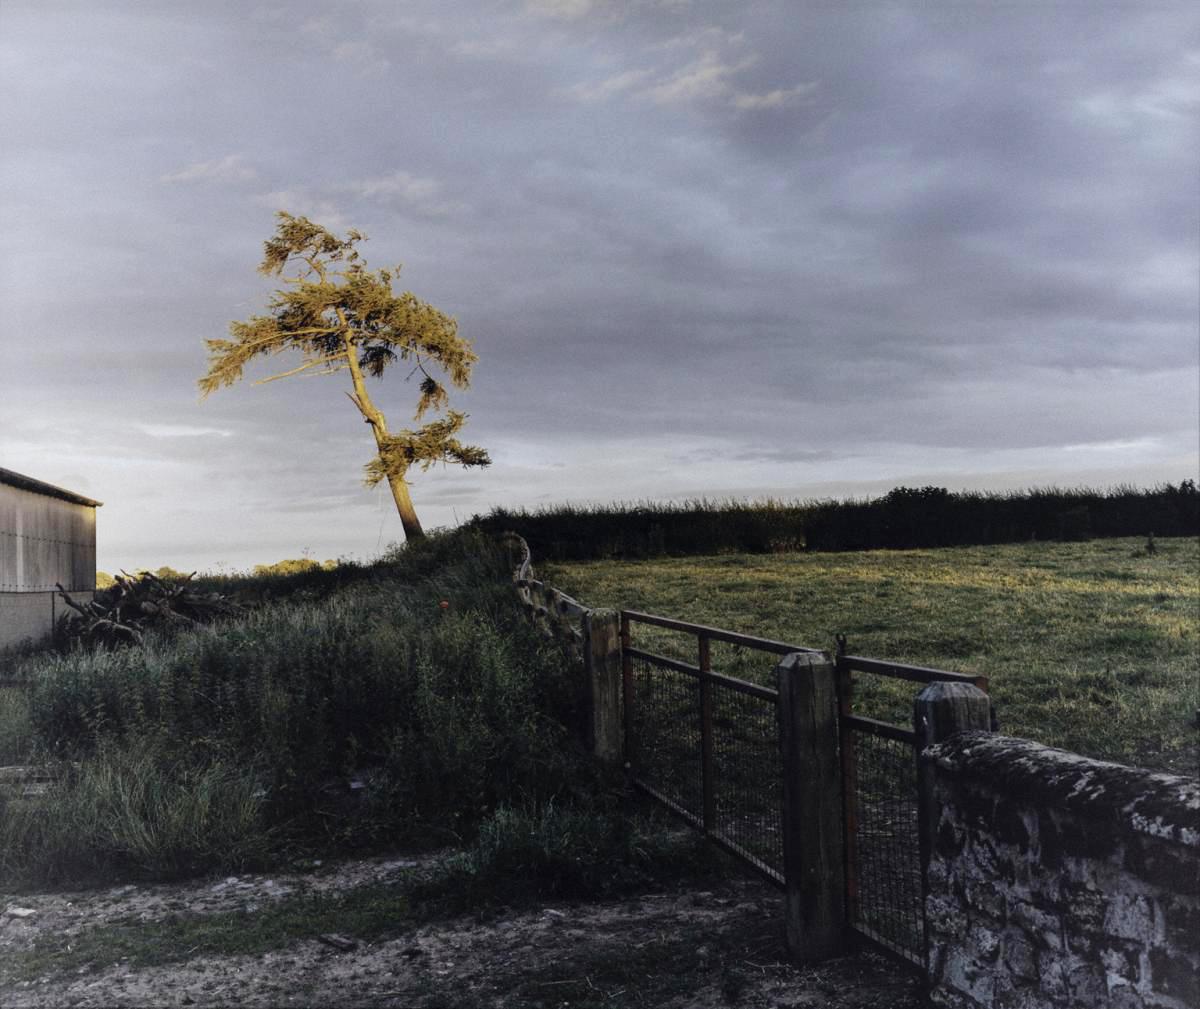 Photograph with a single tree on a grassy landscape and gray sky